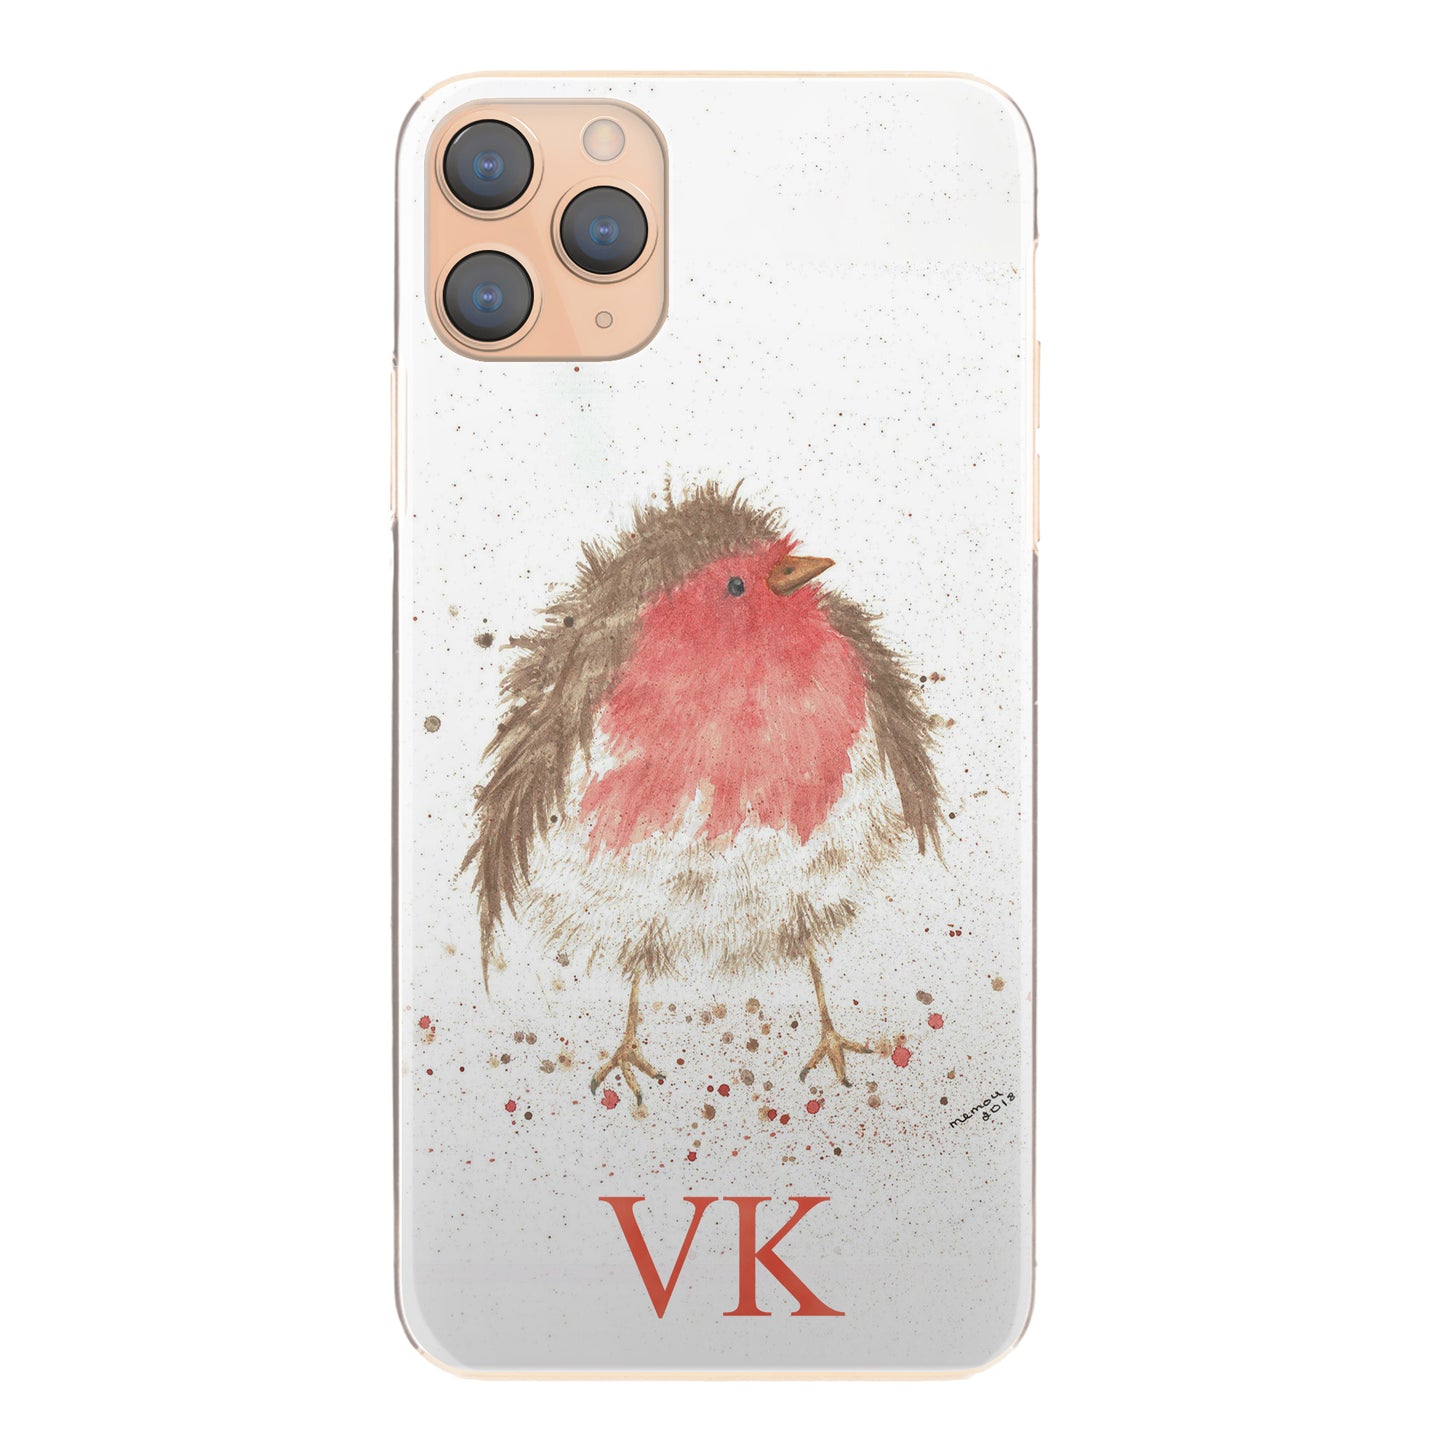 Personalised LG Phone Hard Case with Speckled Robin and Red Initials